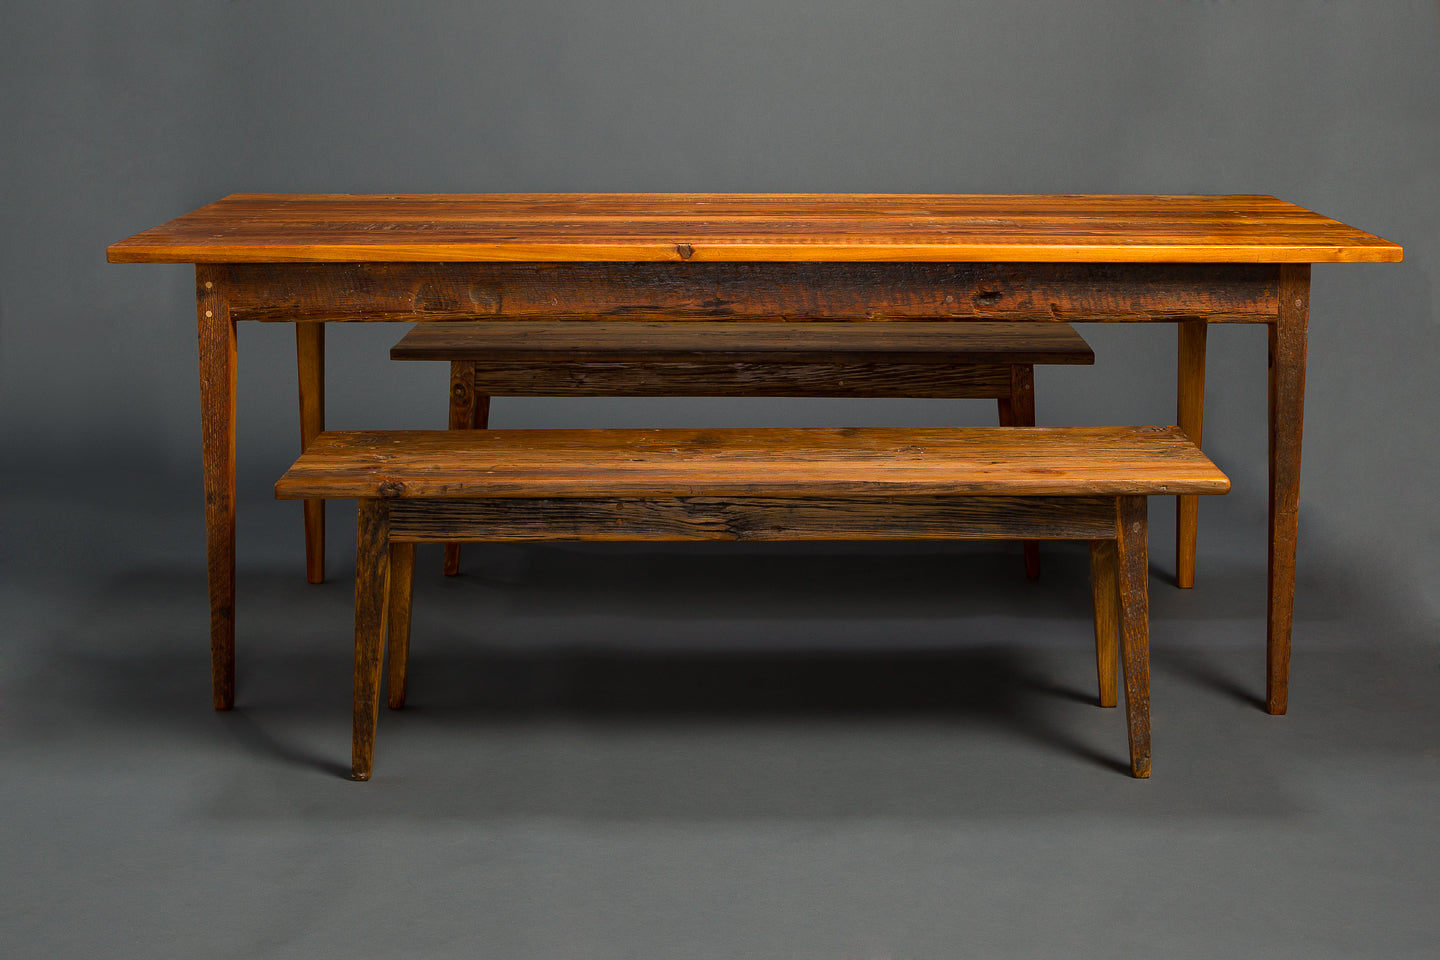 Antique Heart Pine Signature Farm Table with Benches